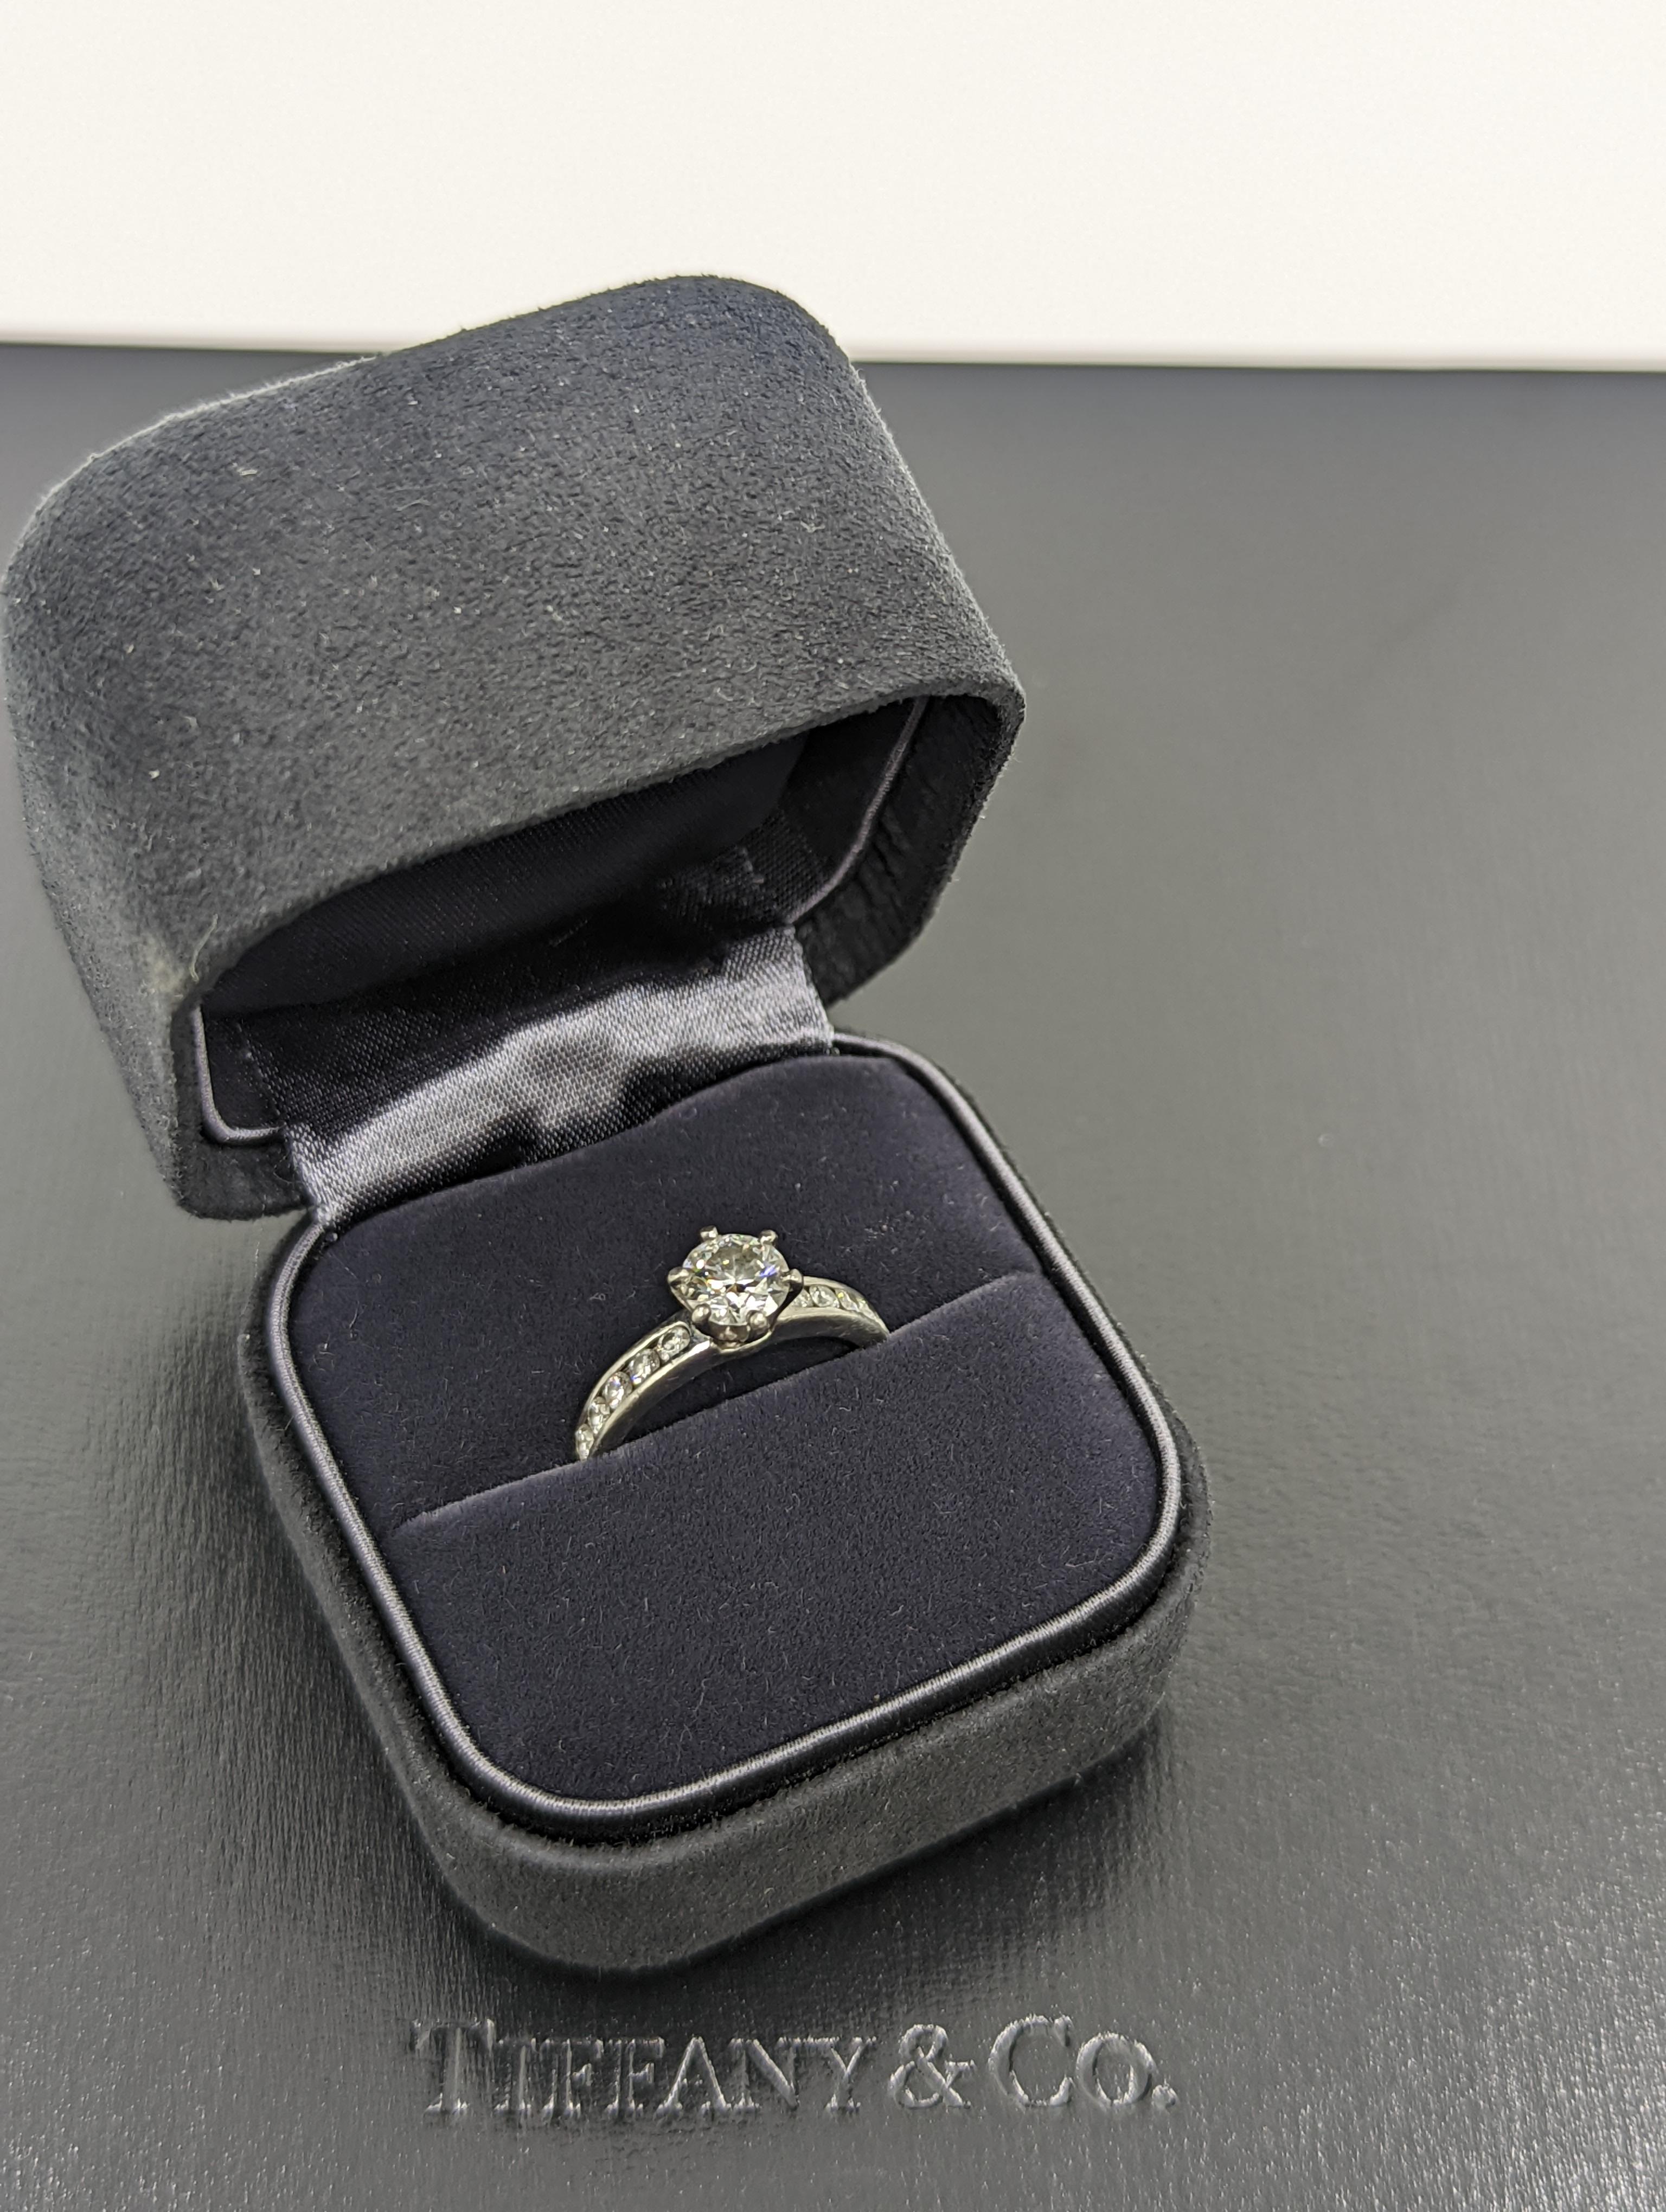 Tiffany&Co. Classic Platinum Diamond Engagement Ring 0.85 Ct Solitaire 1.15 CTW For Sale 2